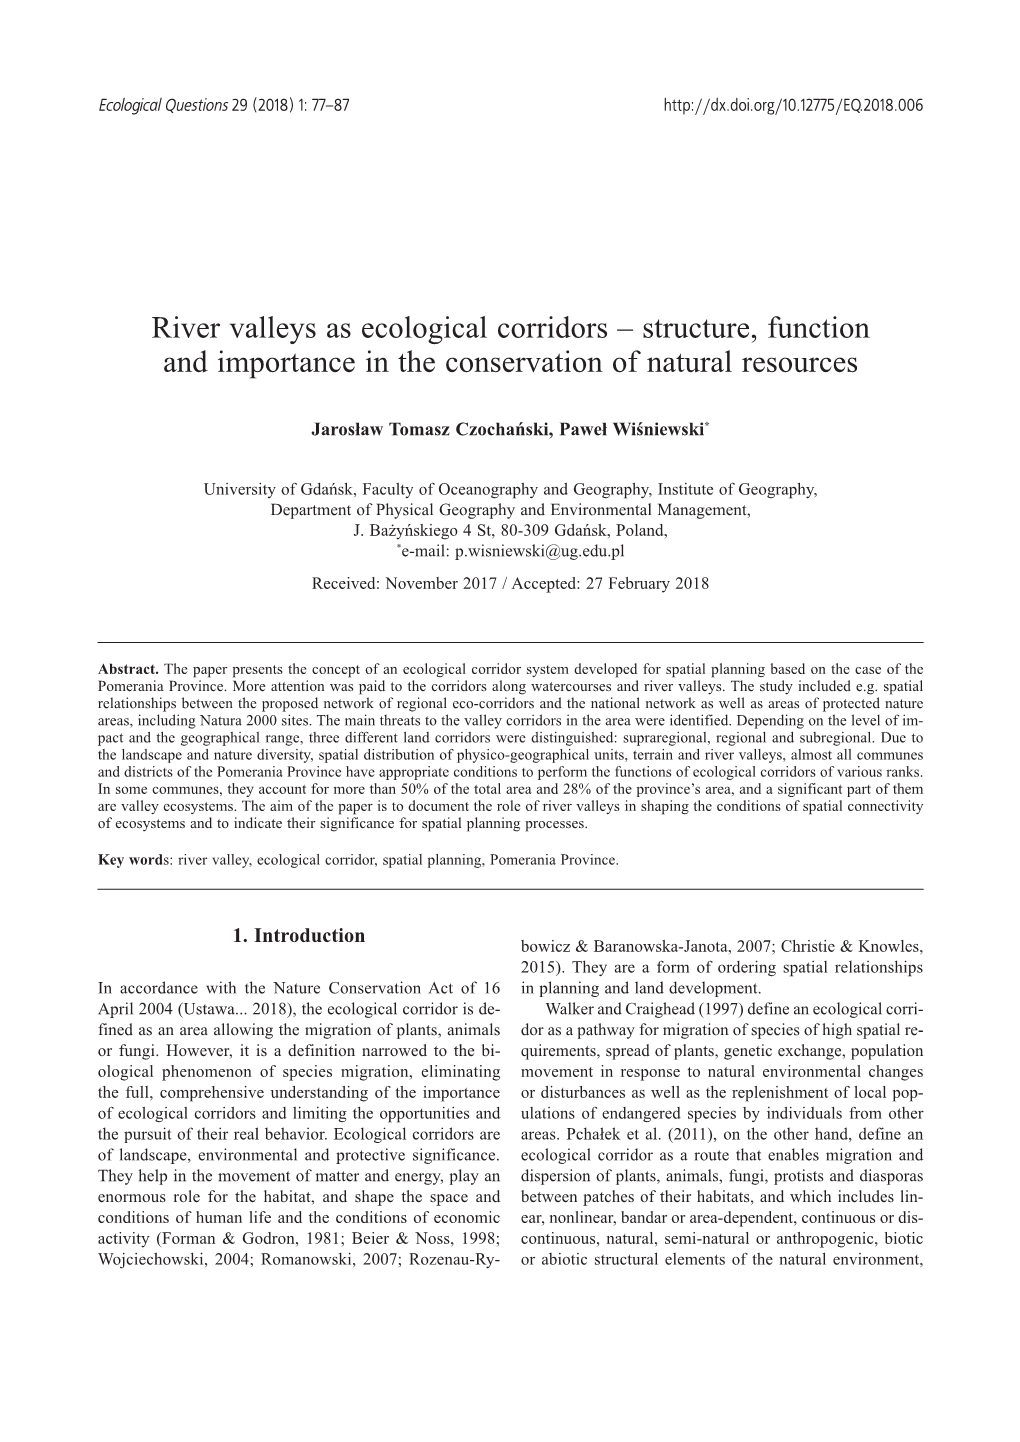 River Valleys As Ecological Corridors – Structure, Function and Importance in the Conservation of Natural Resources